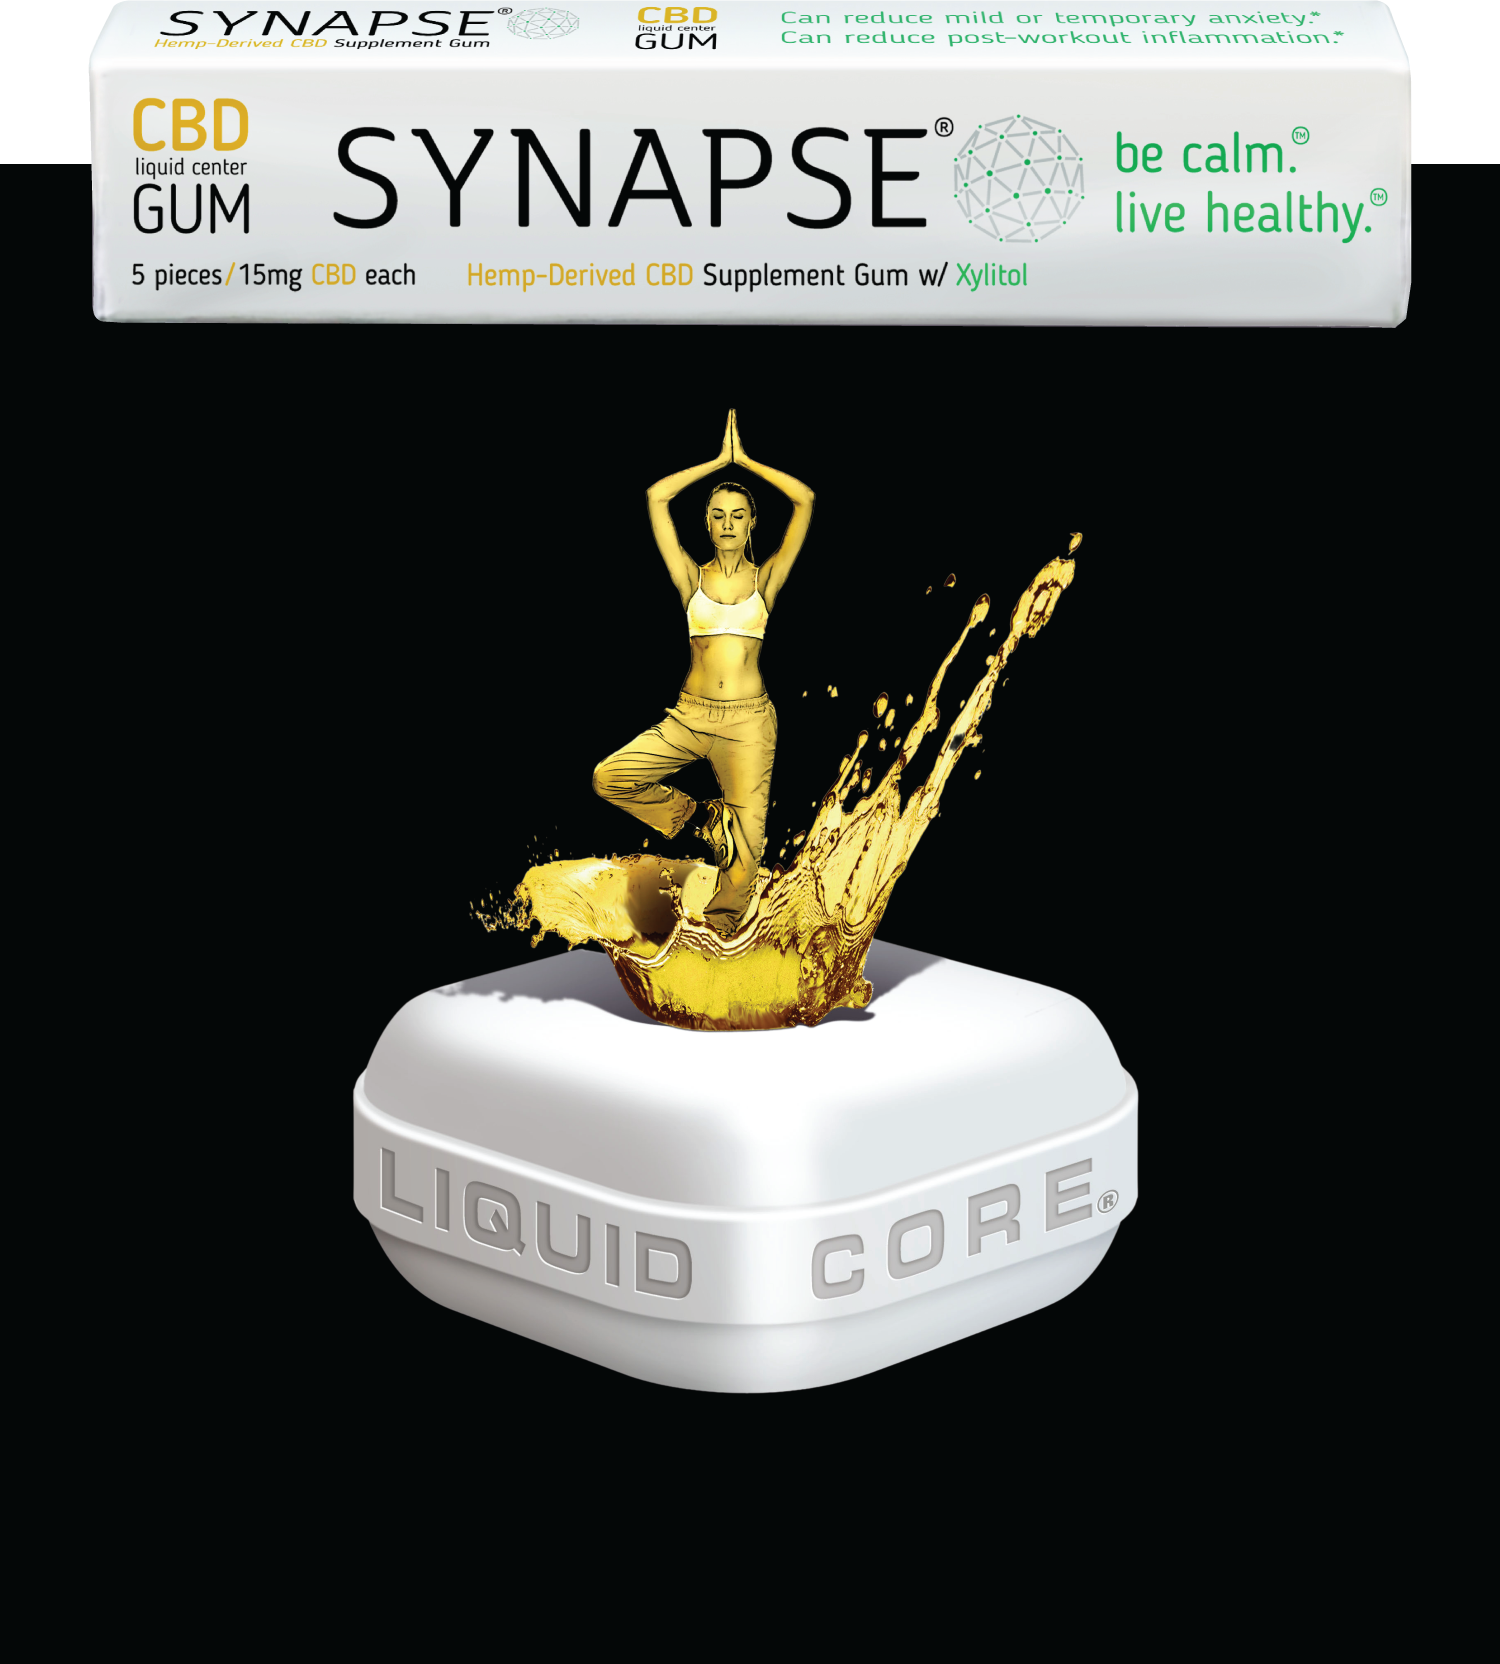 synapse gum pack with a piece of liquid core gum with woman doing a yoga pose coming out of the center